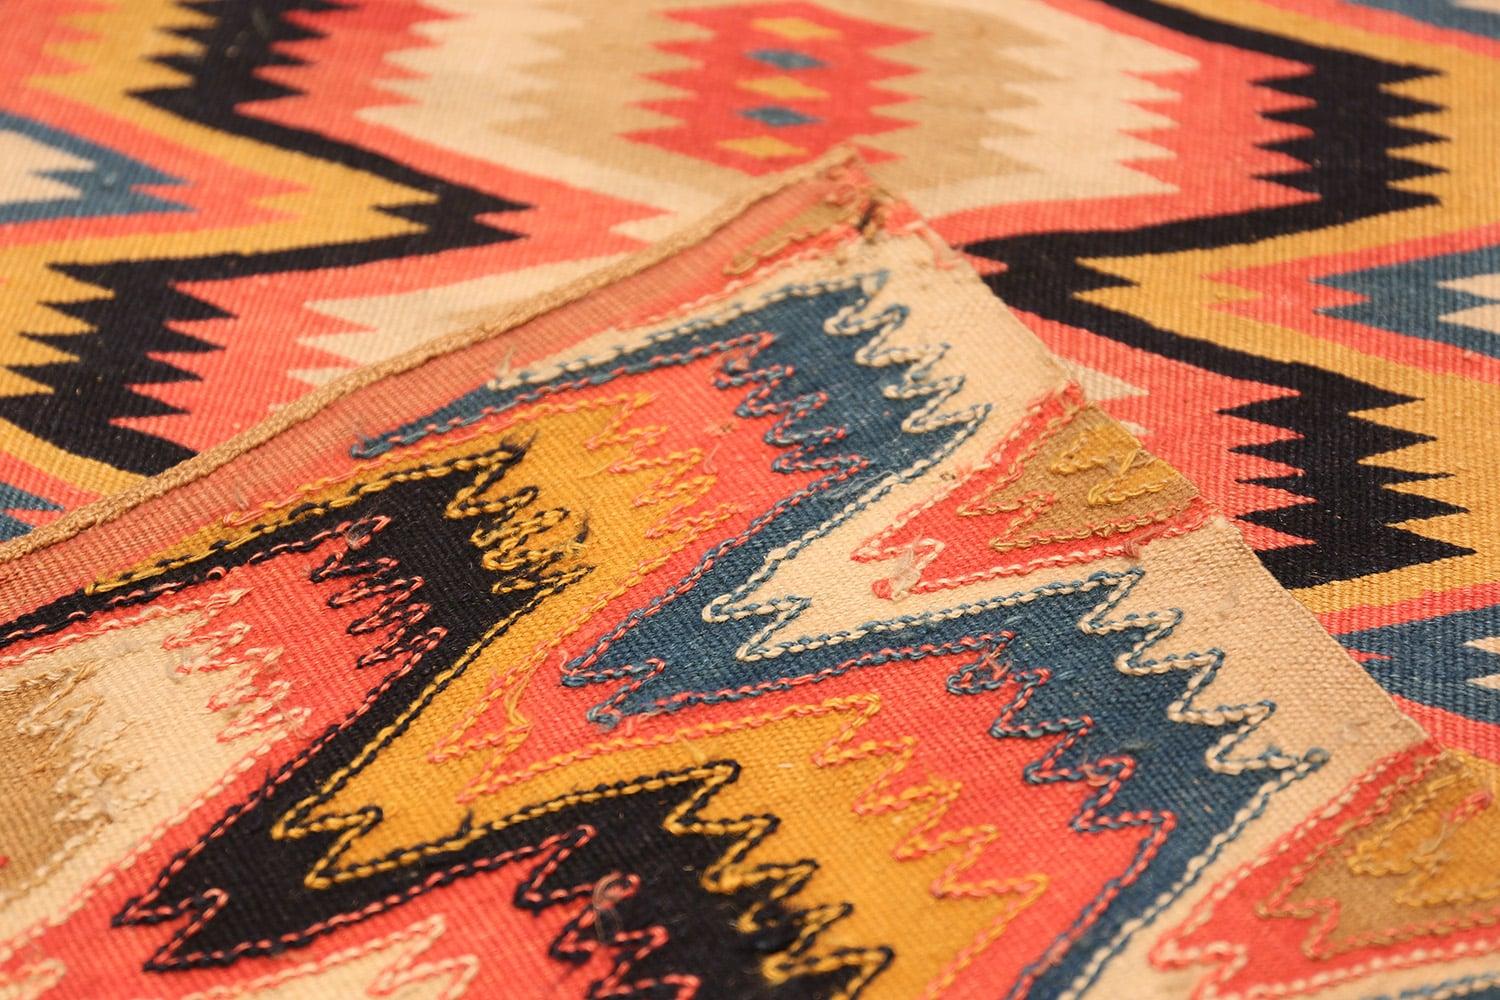 20th Century Vintage Swedish Kilim Rug. Size: 1 ft 8 in x 5 ft 6 in (0.51 m x 1.68 m)